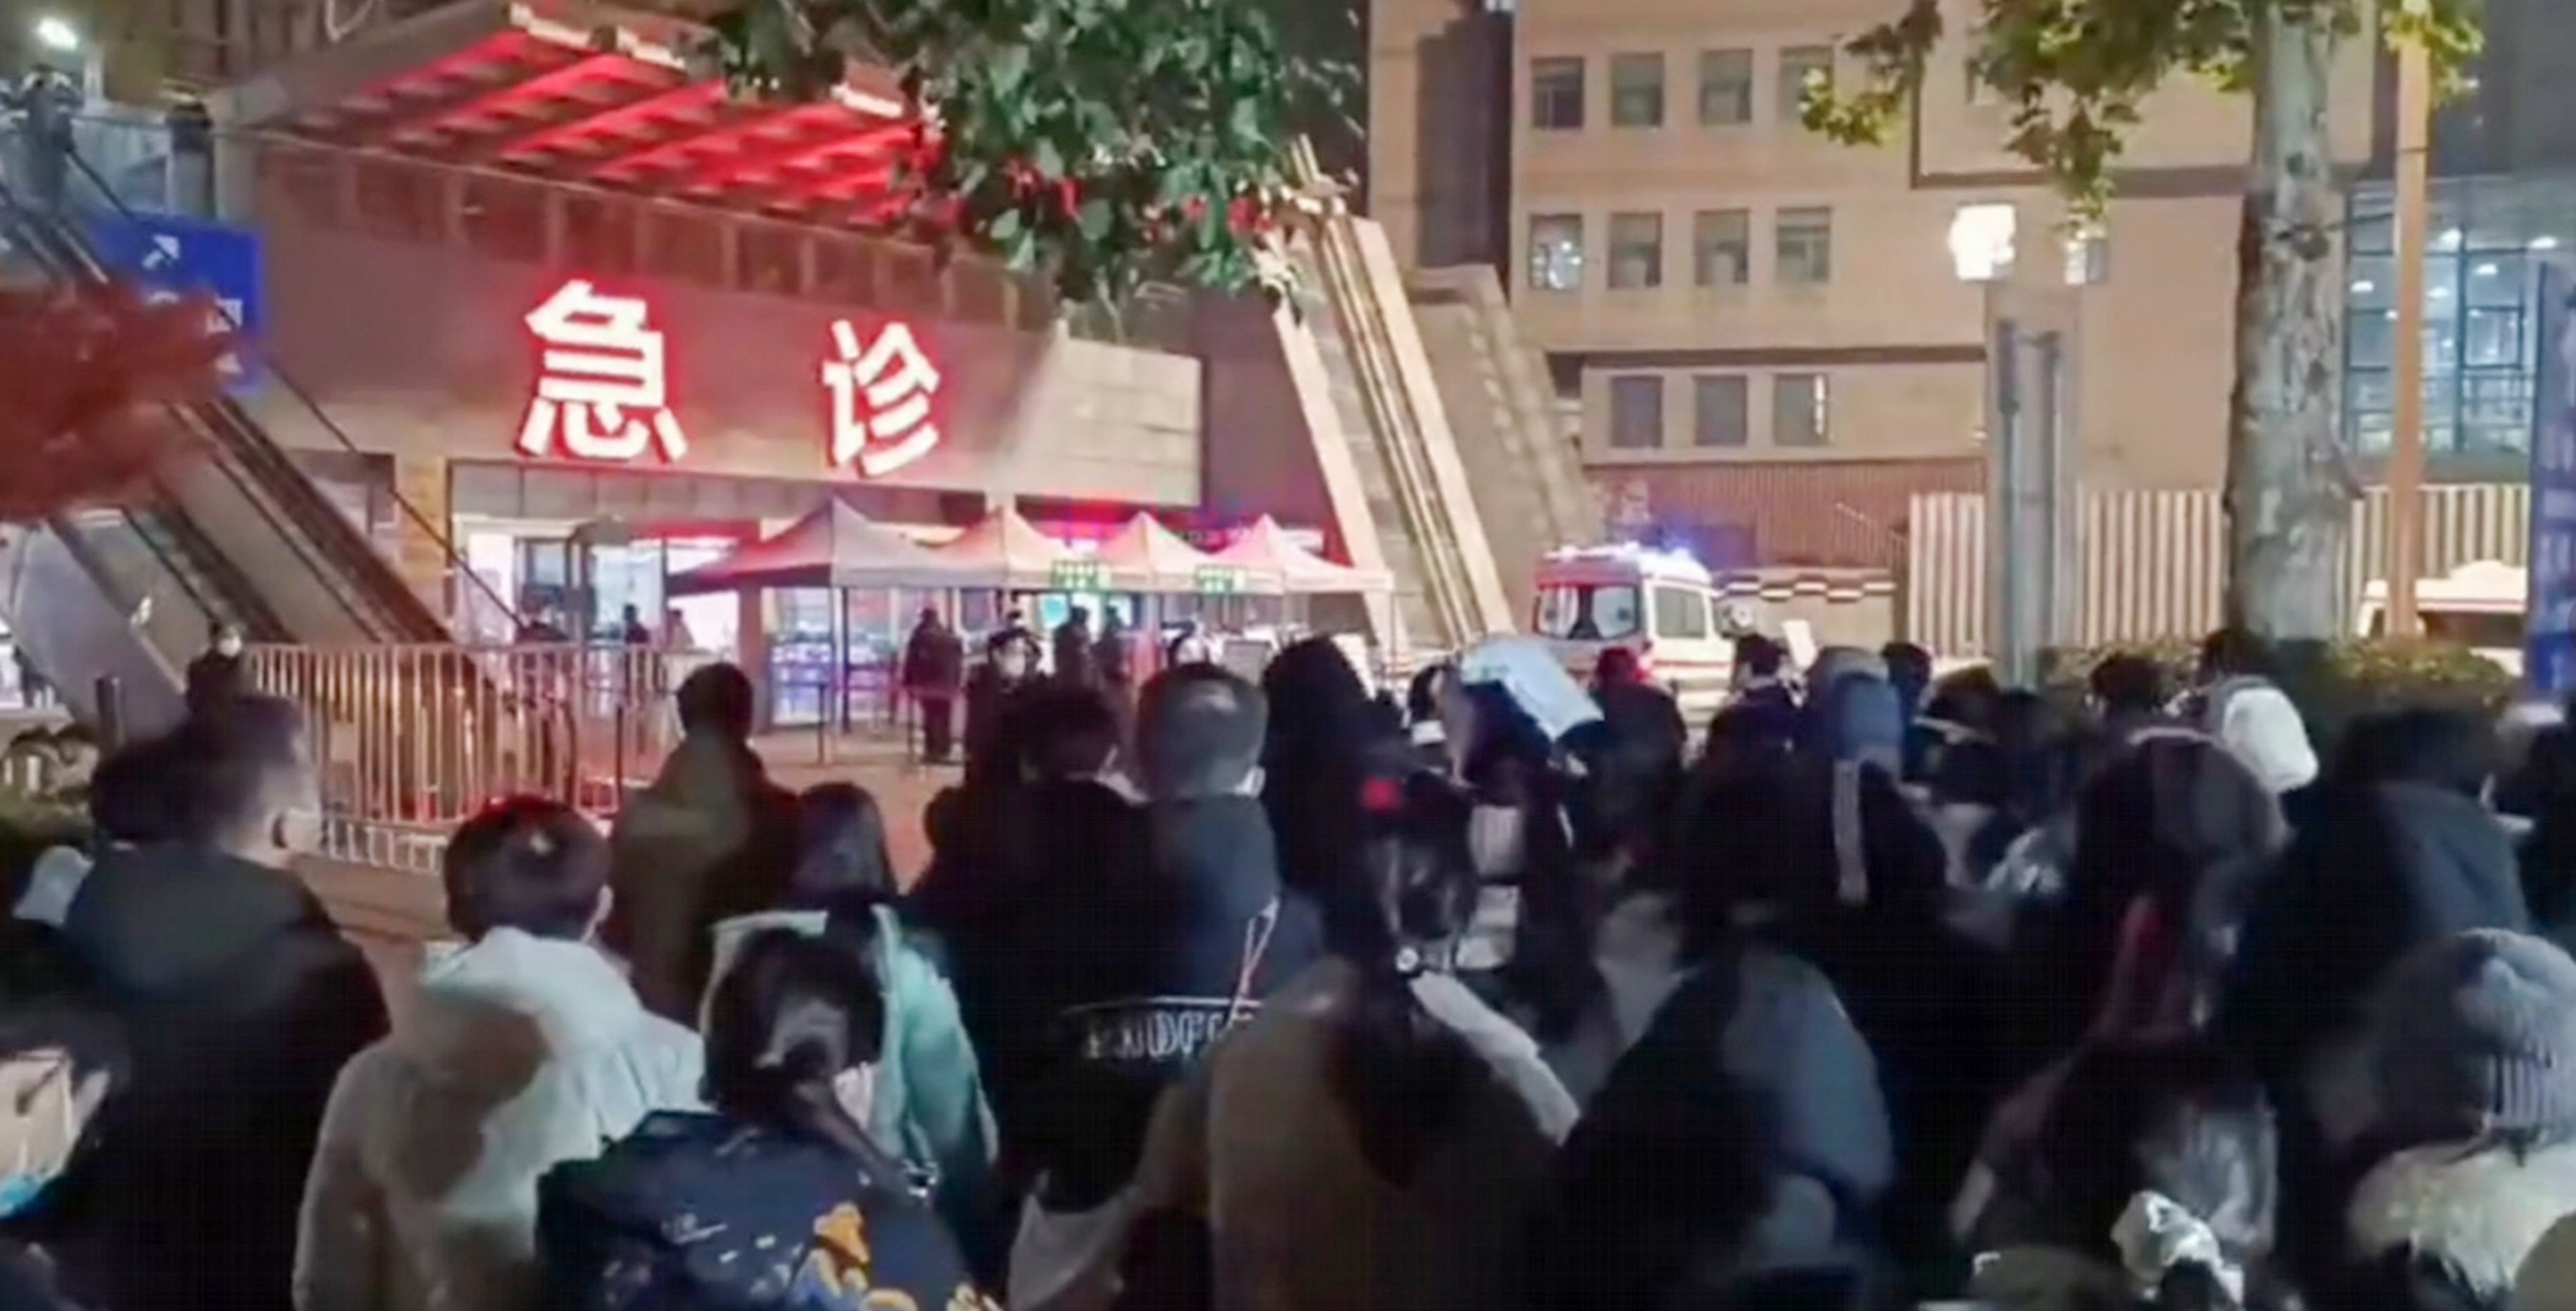 Protests have erupted in the past two weeks in medical schools and hospitals  across China, including Nanjing Medical University, pictured. Photo: Twitter